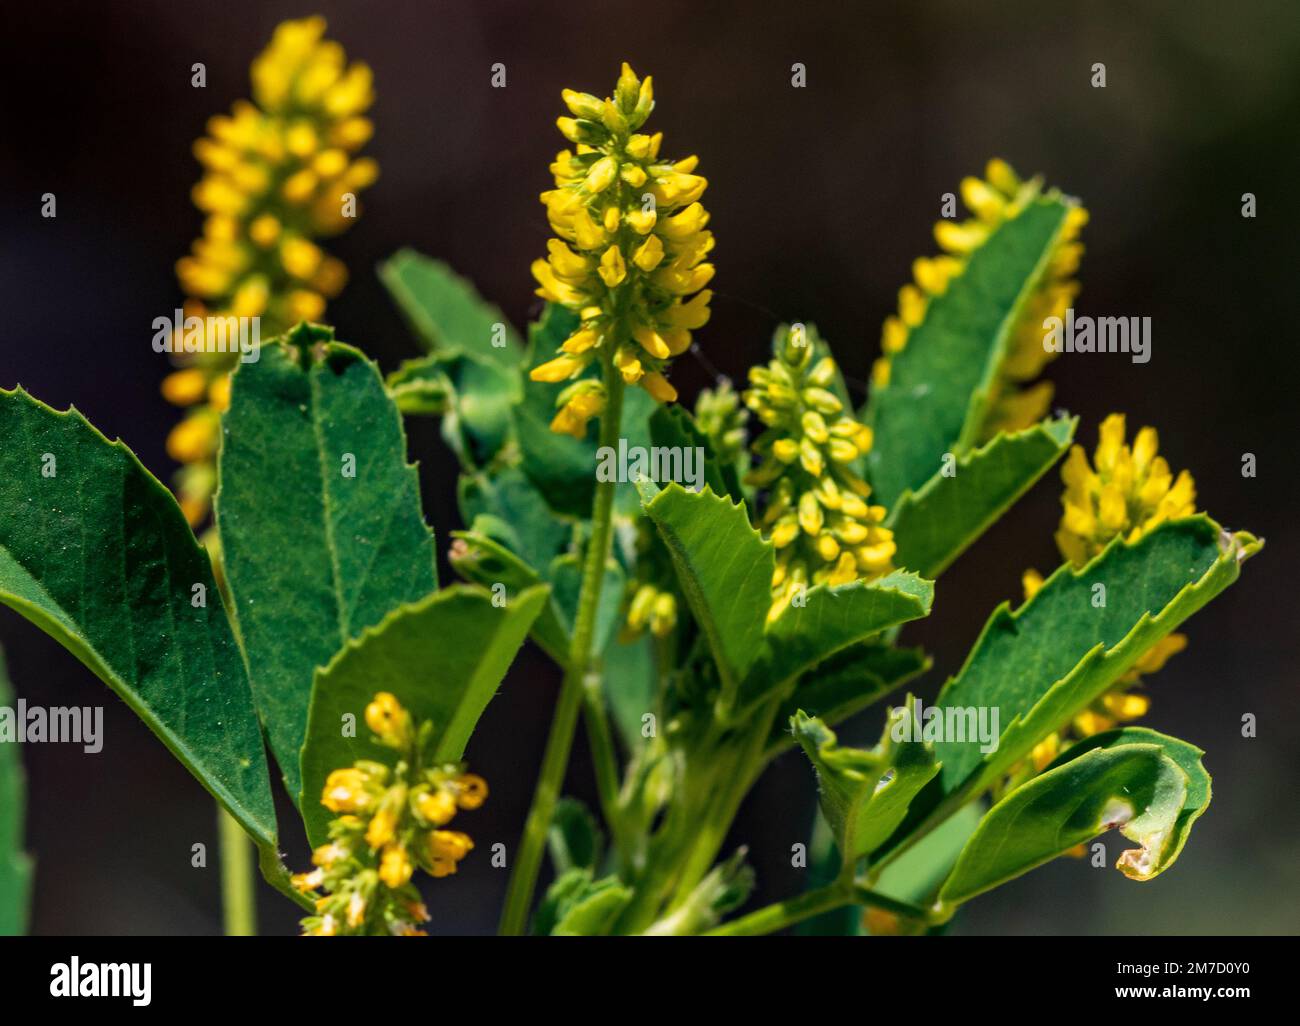 Melilotus indicus, Small Melilot Plant in Flower Stock Photo